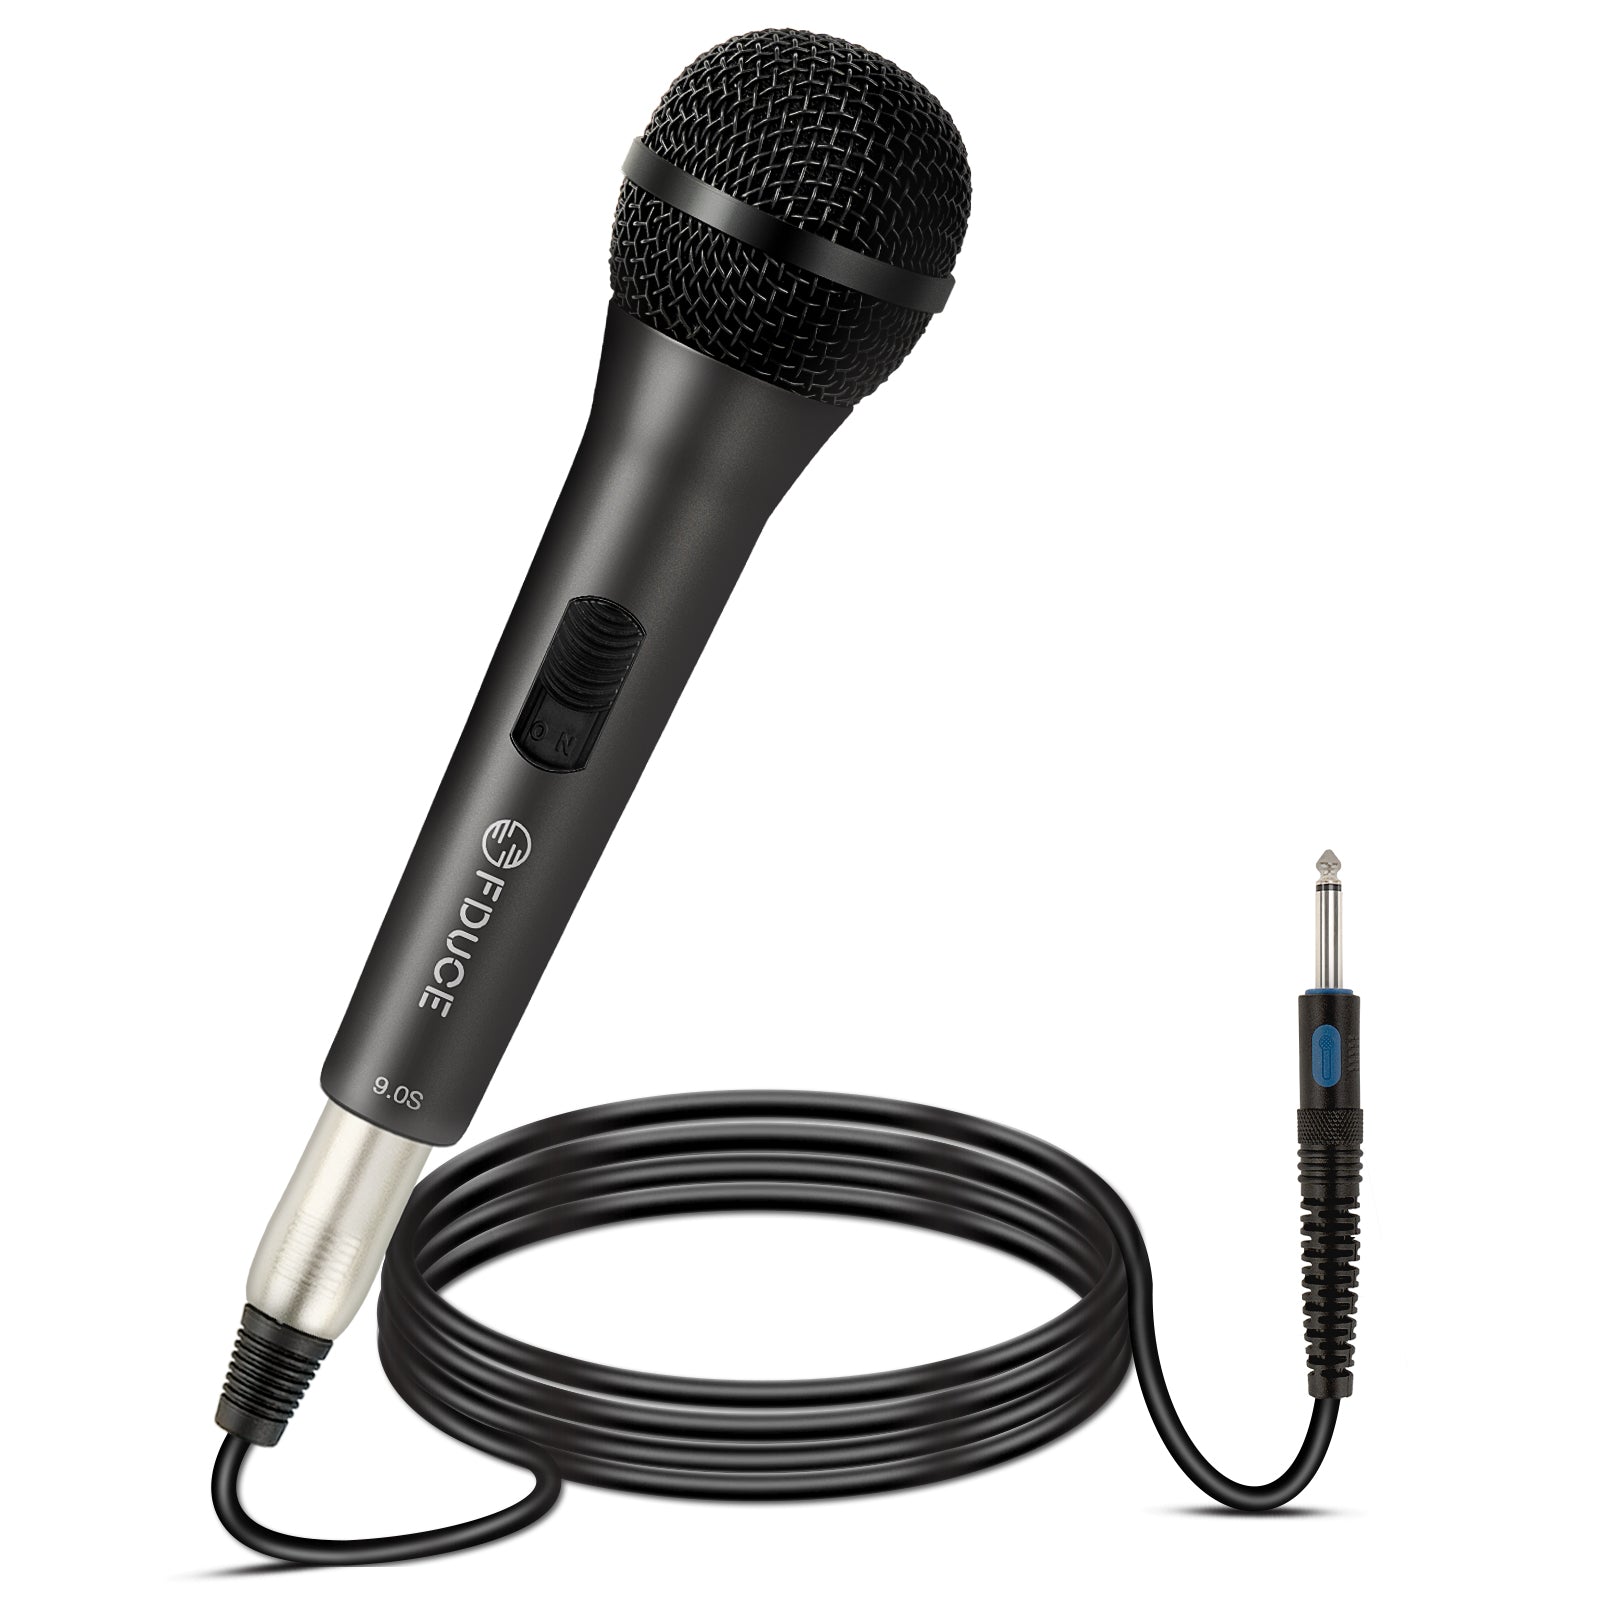 FDUCE Dynamic Wired Microphone 9.0s